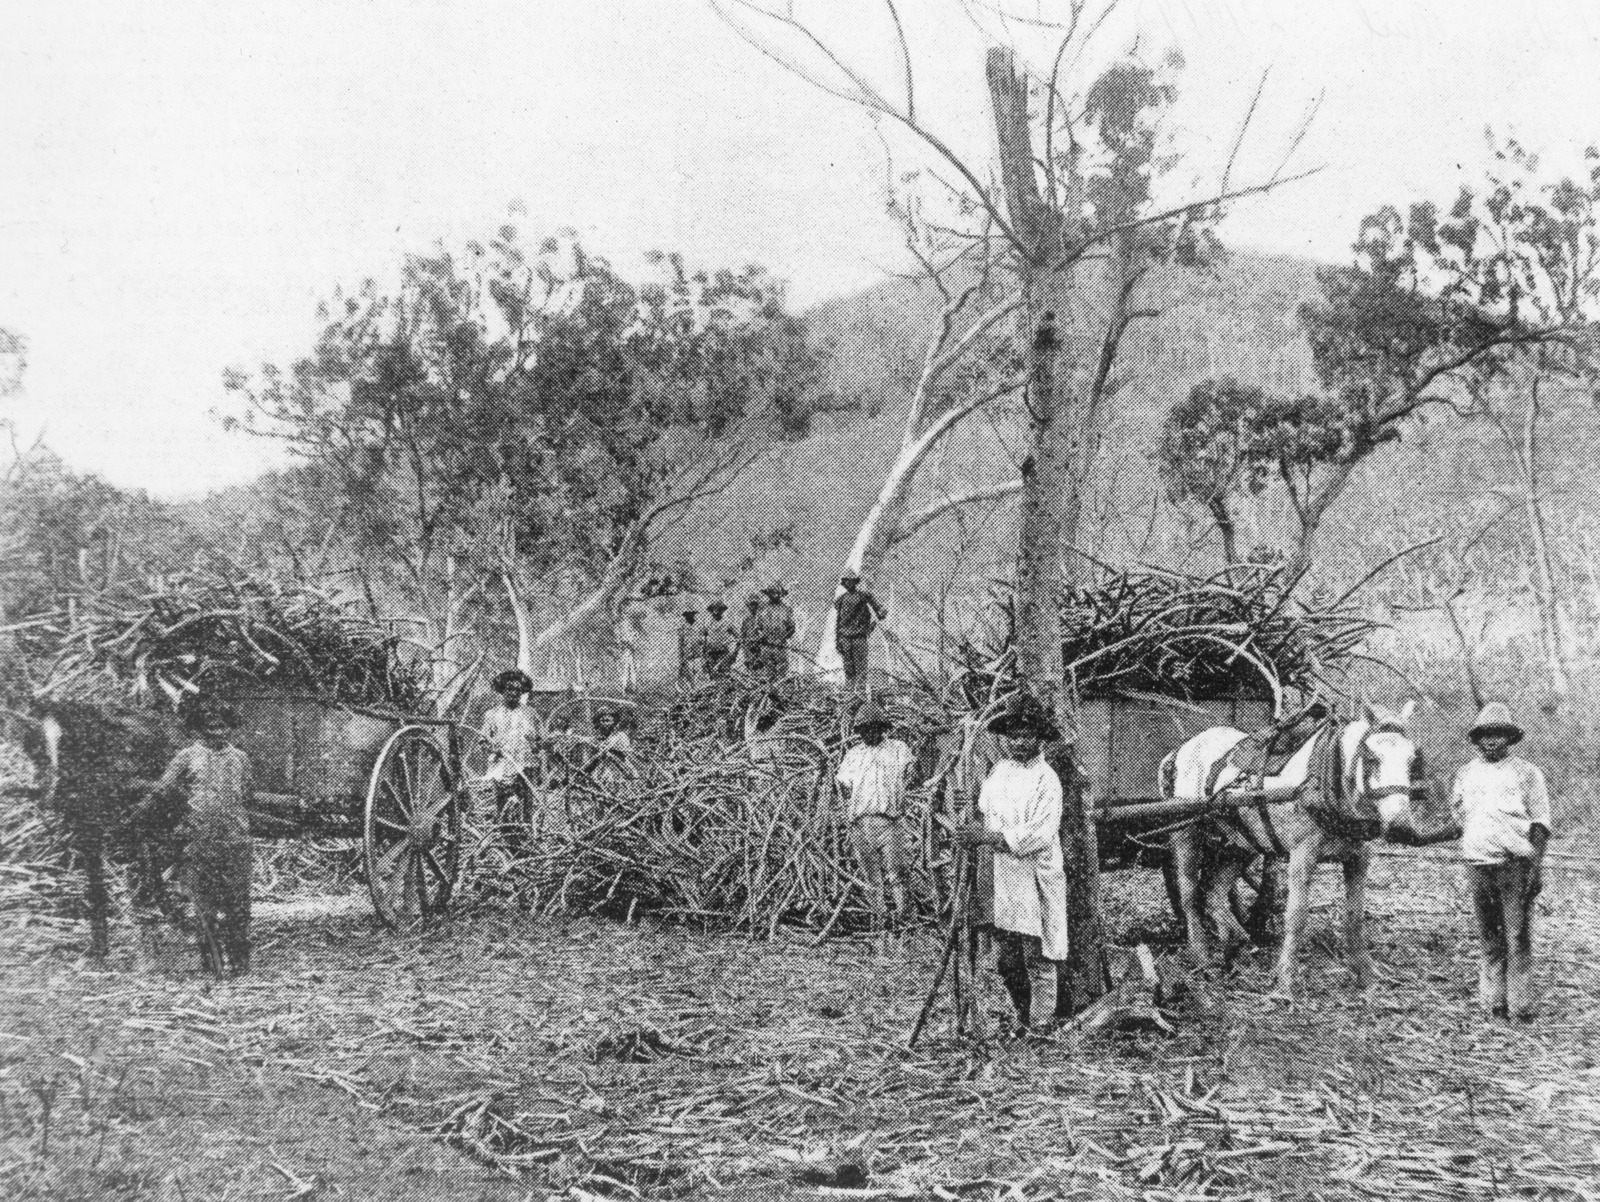 Australian South Sea Islanders with wagons loaded with sugar cane